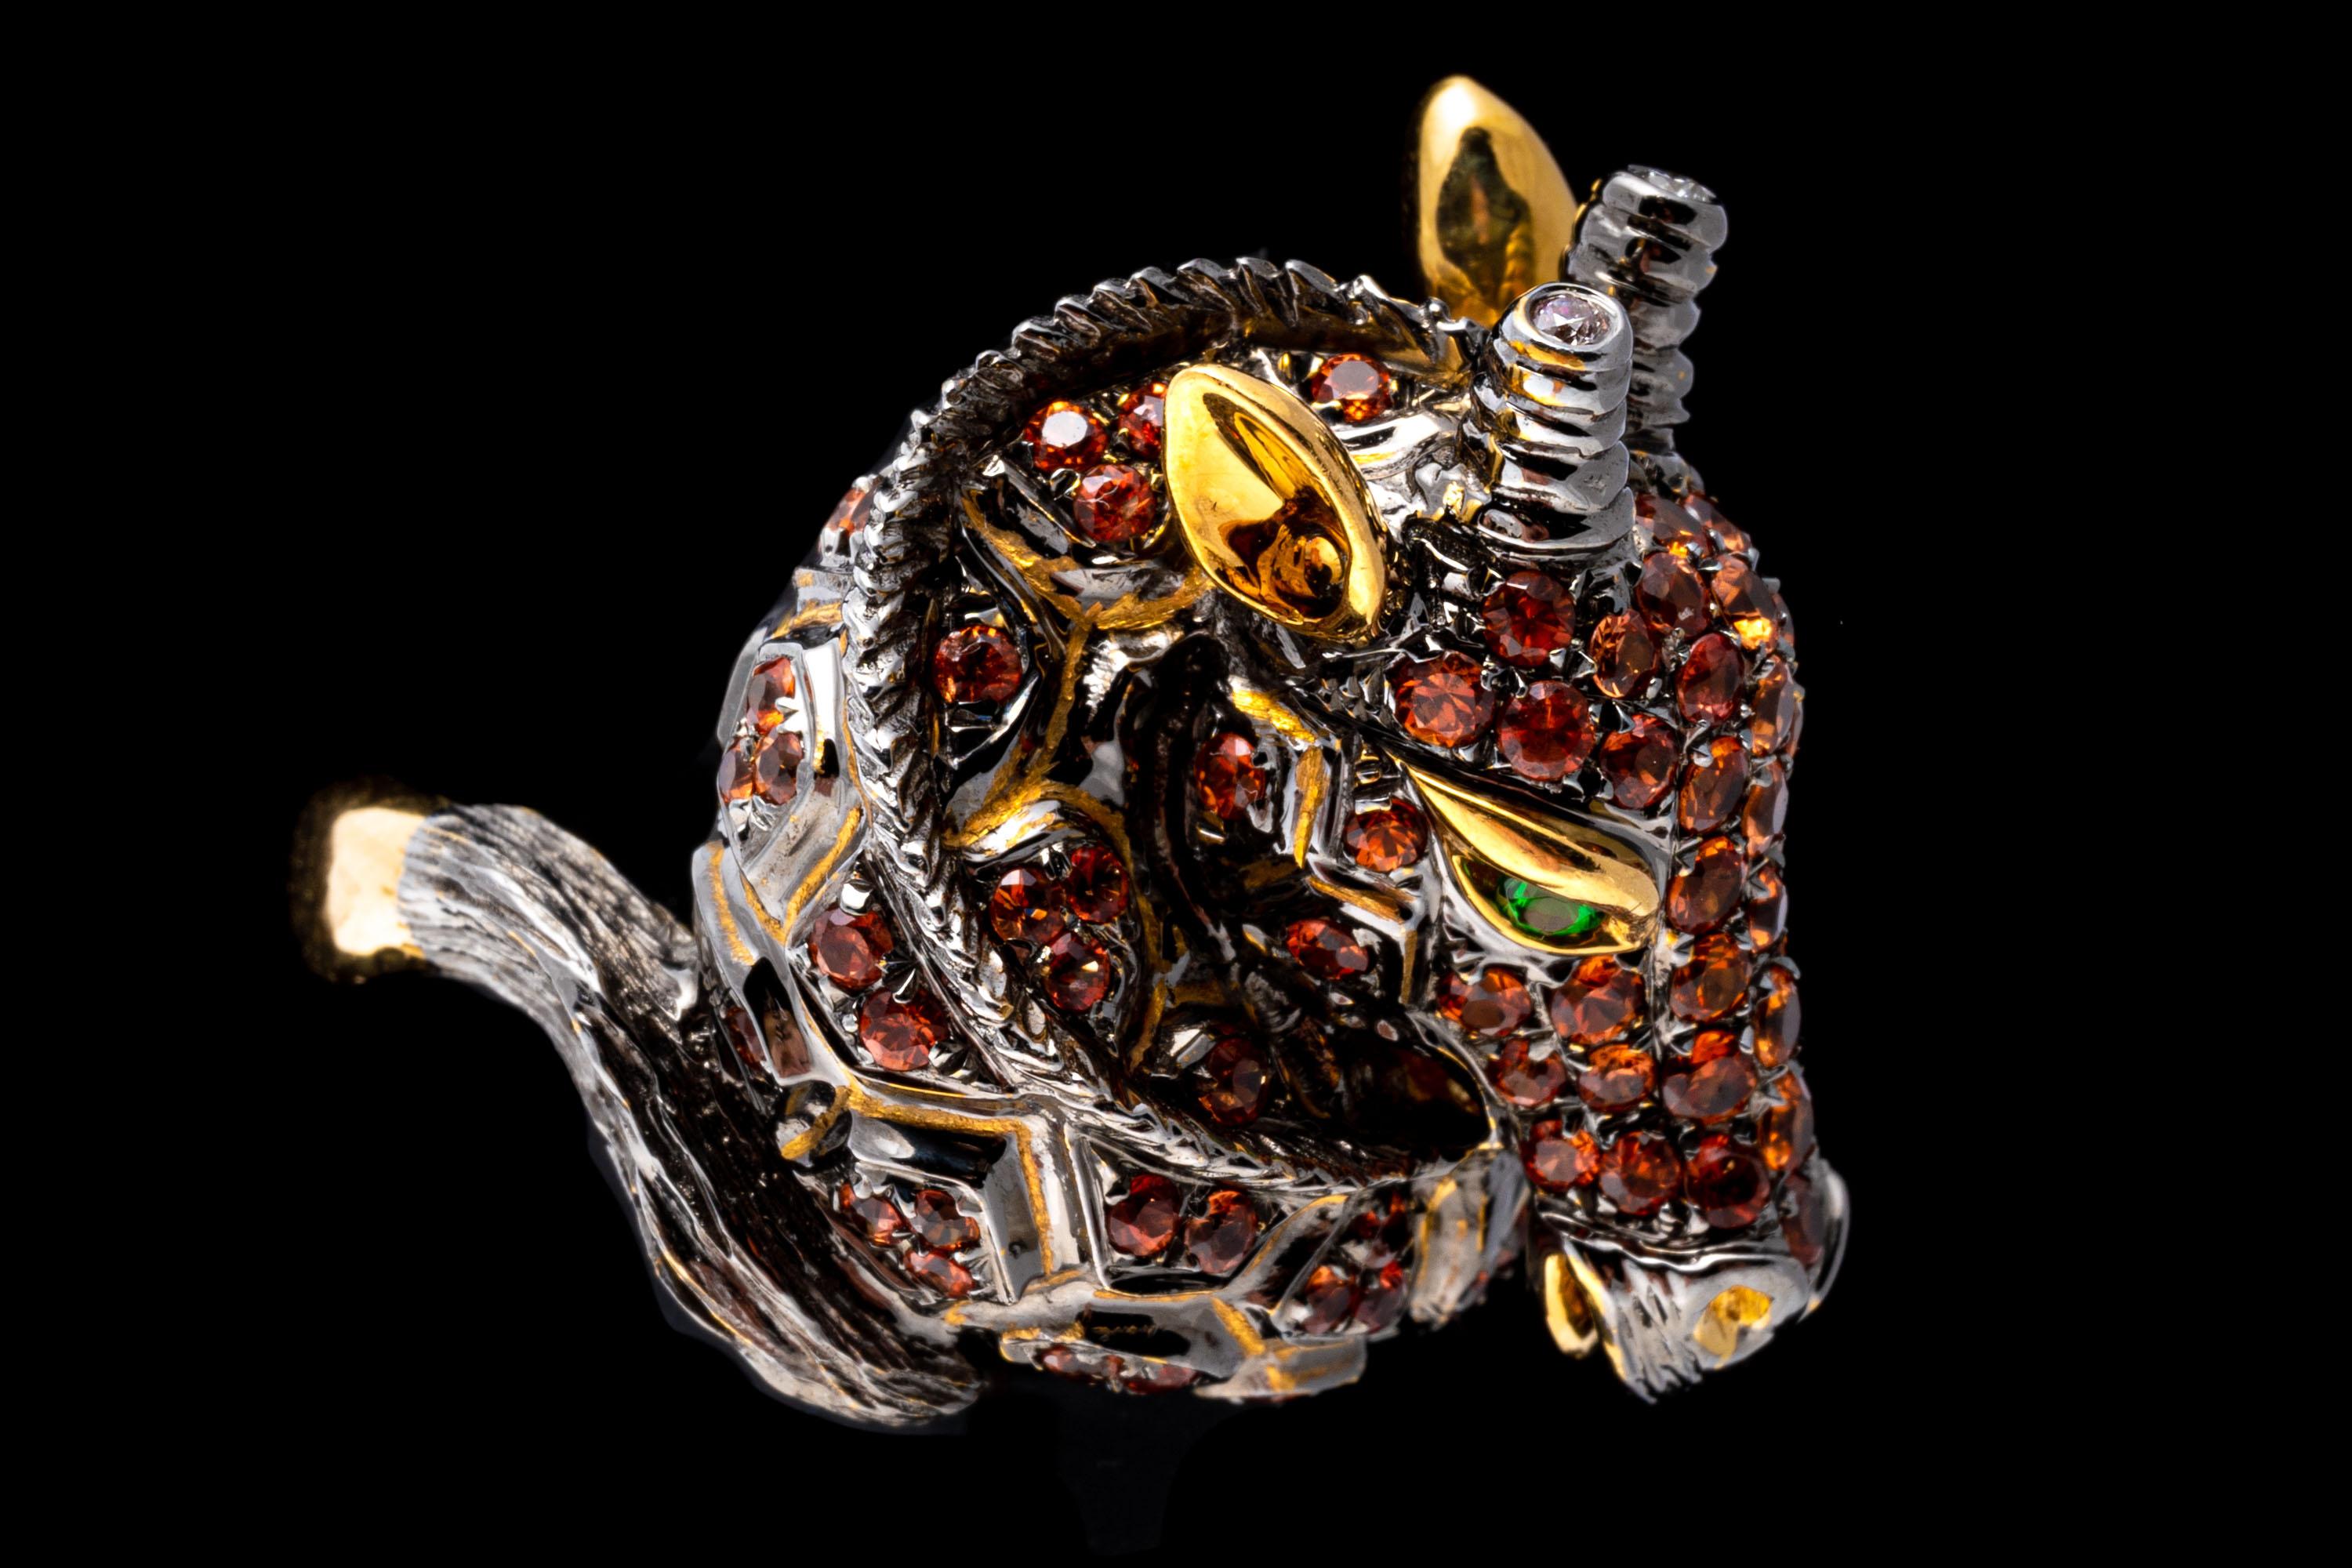 18k Yellow Gold Pave Set Topaz Patterned Figural Giraffe Ring For Sale 6